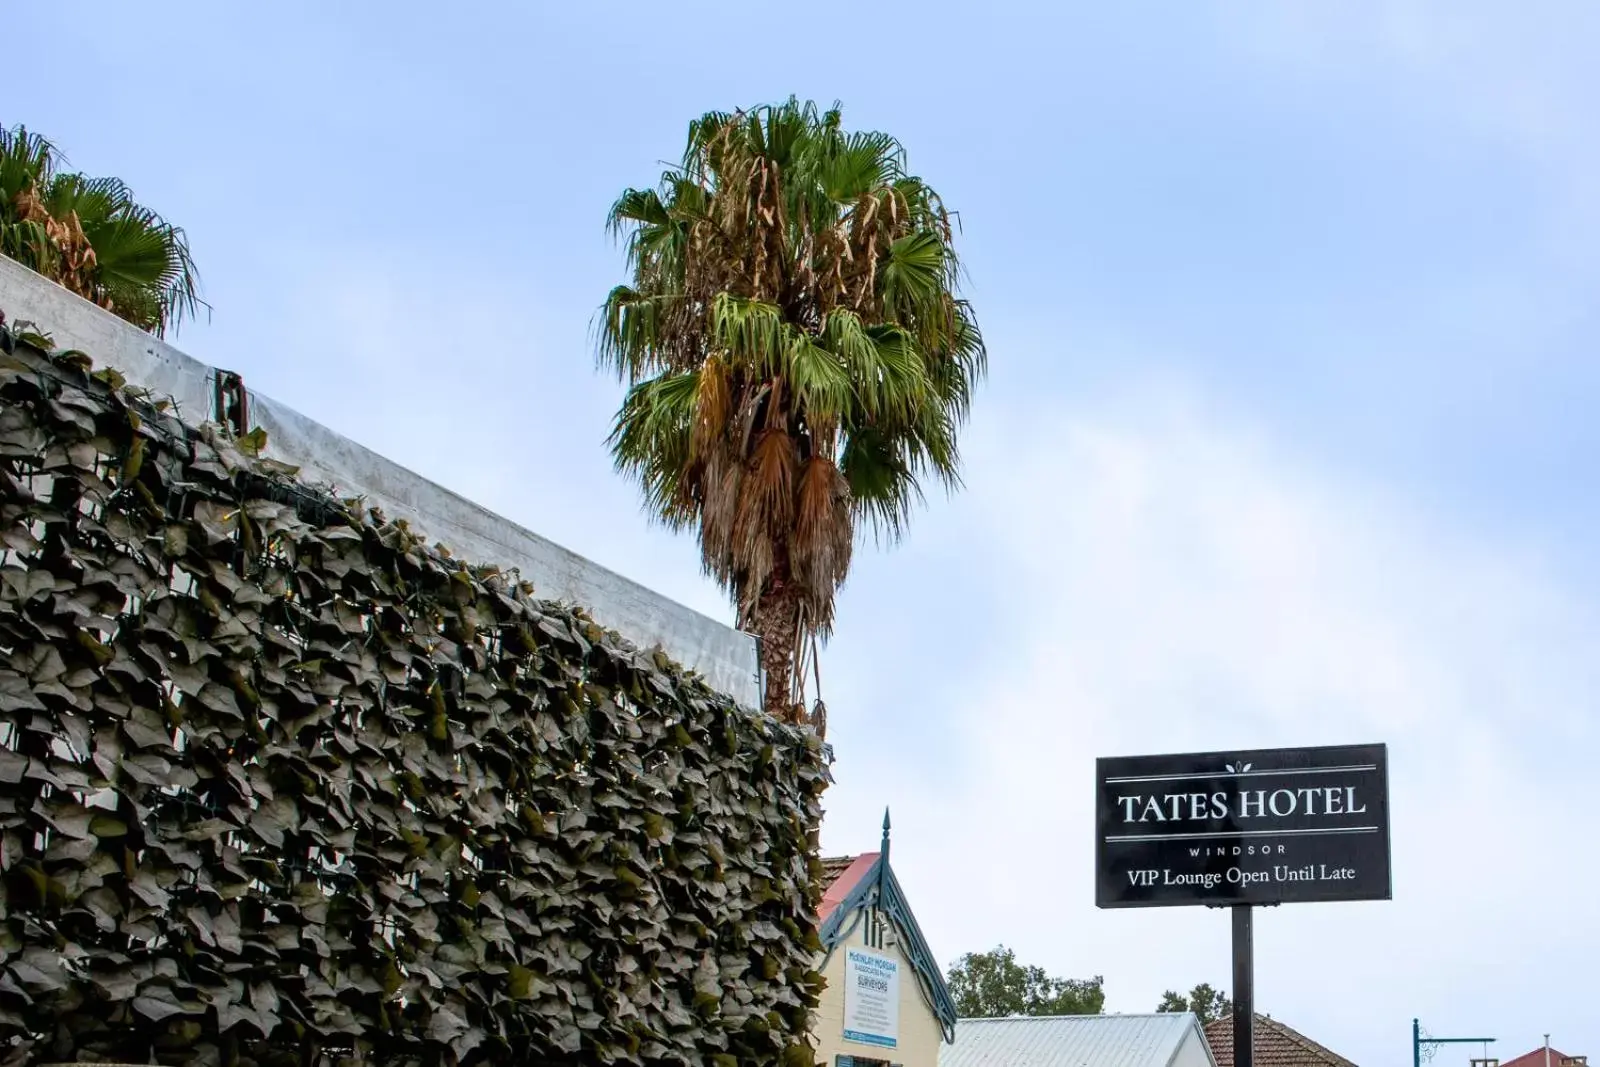 Property building in Tates Hotel Windsor